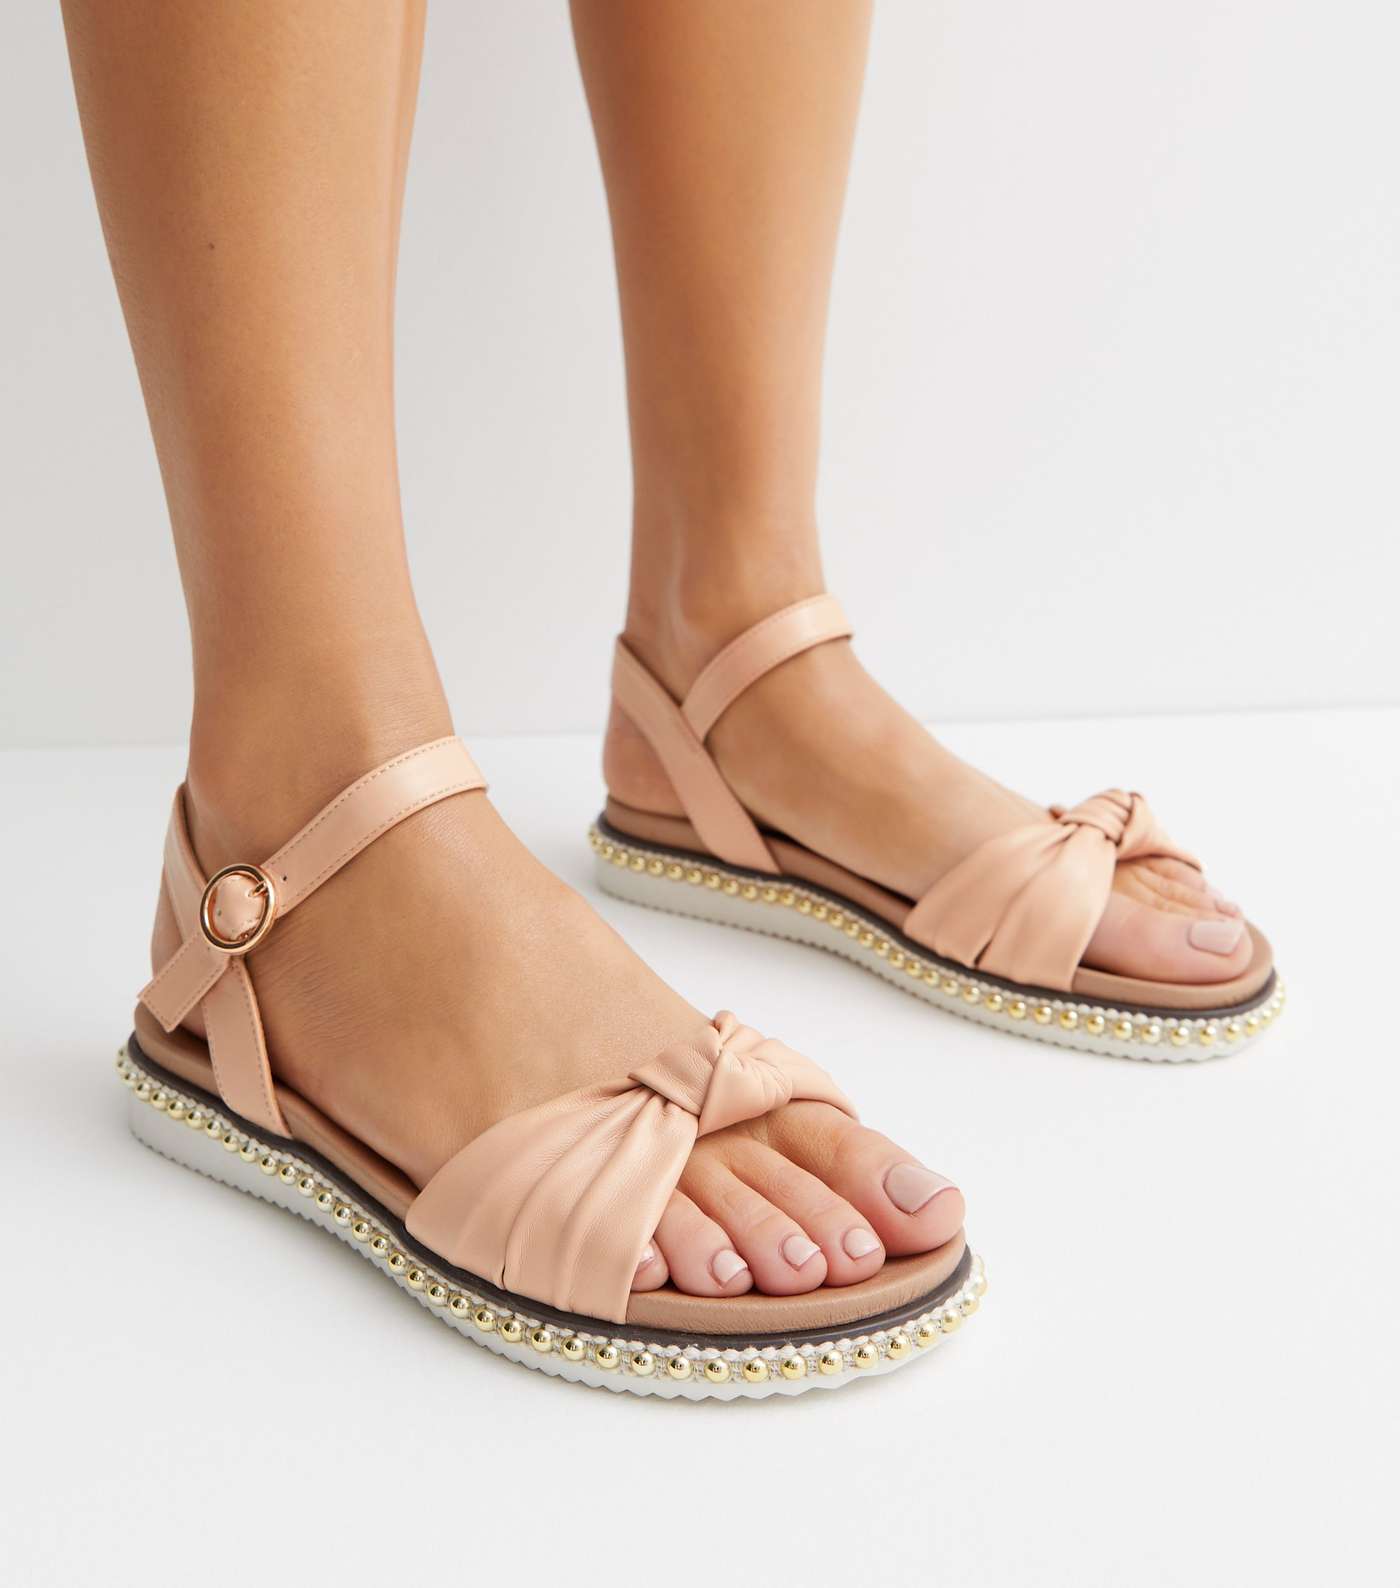 Wide Fit Pale Pink Leather-Look Beaded Footbed Sandals Image 2